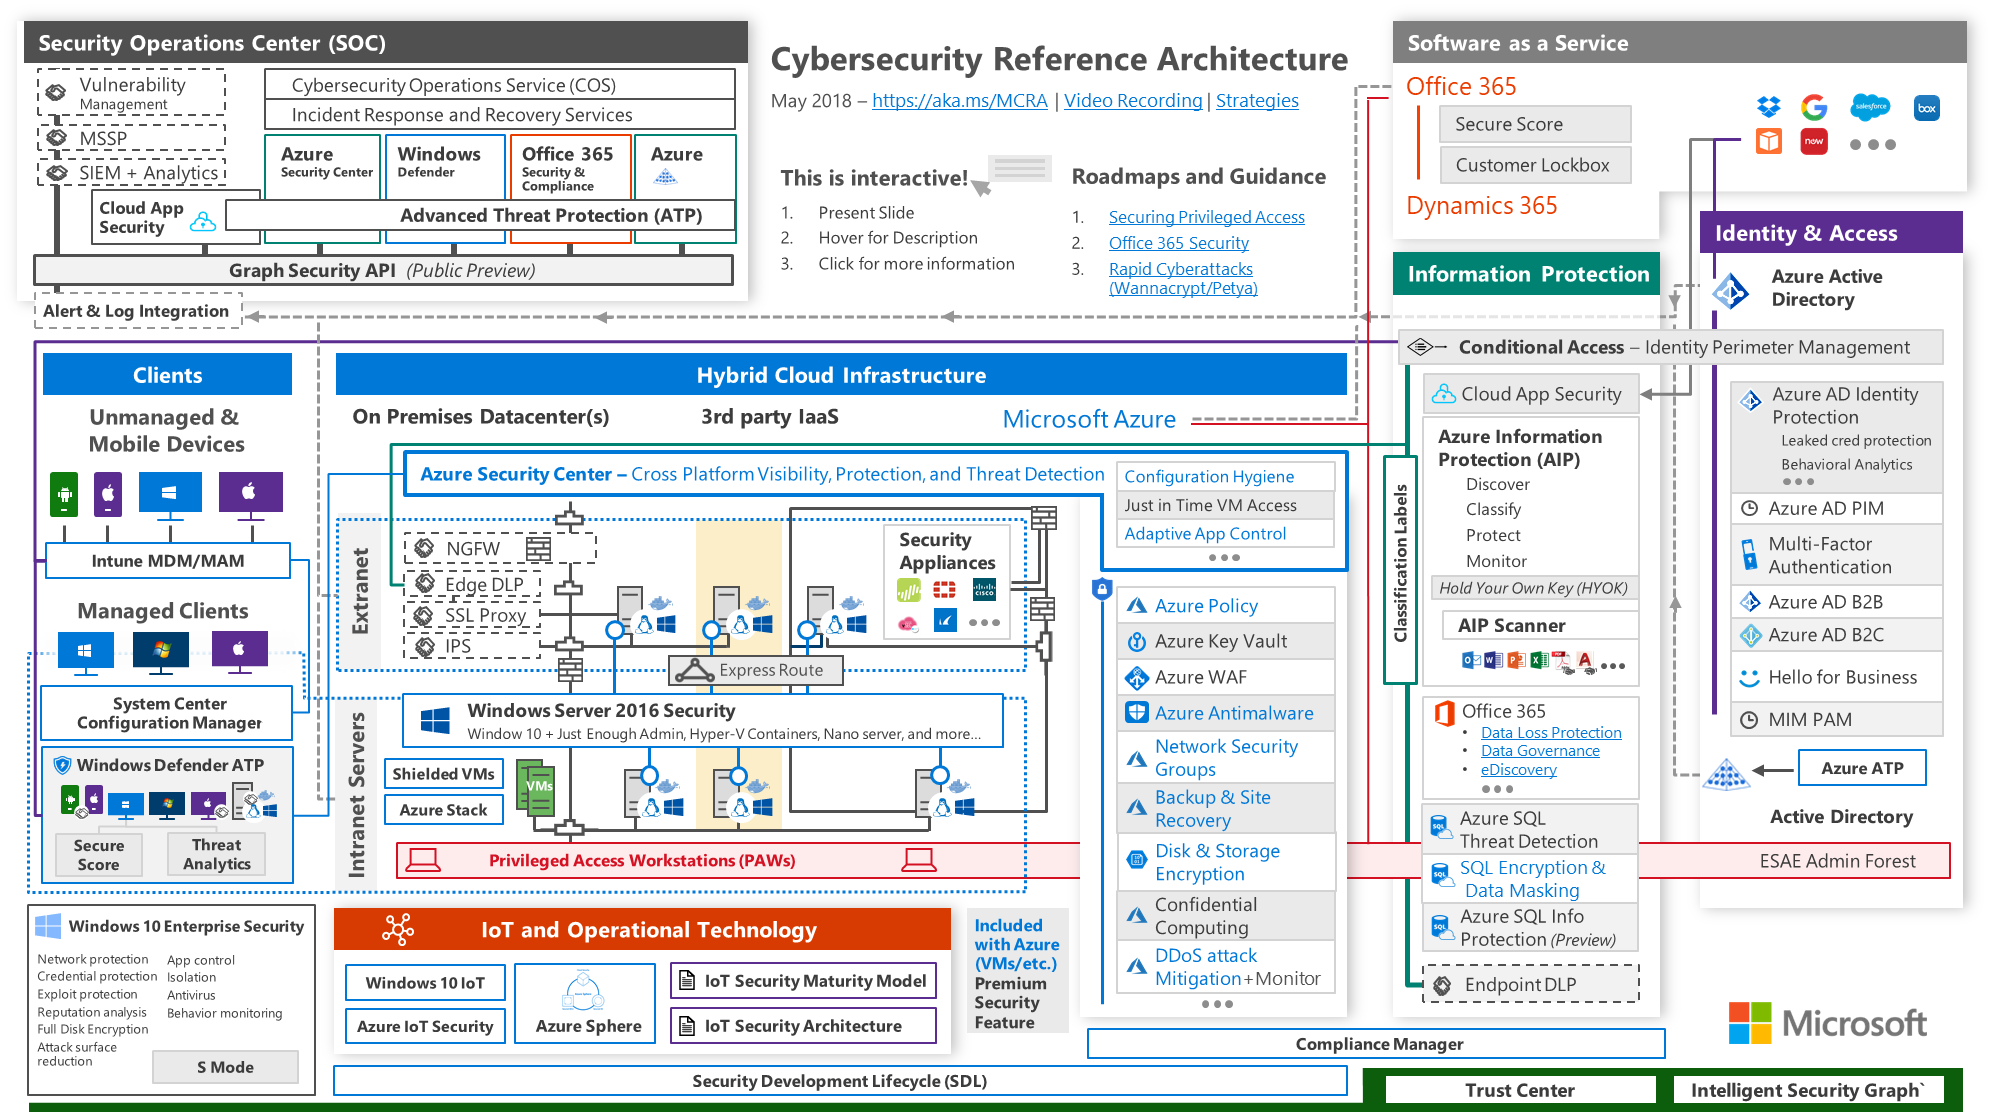 Microsoft Dynamics 365 Architecture Overview 3360